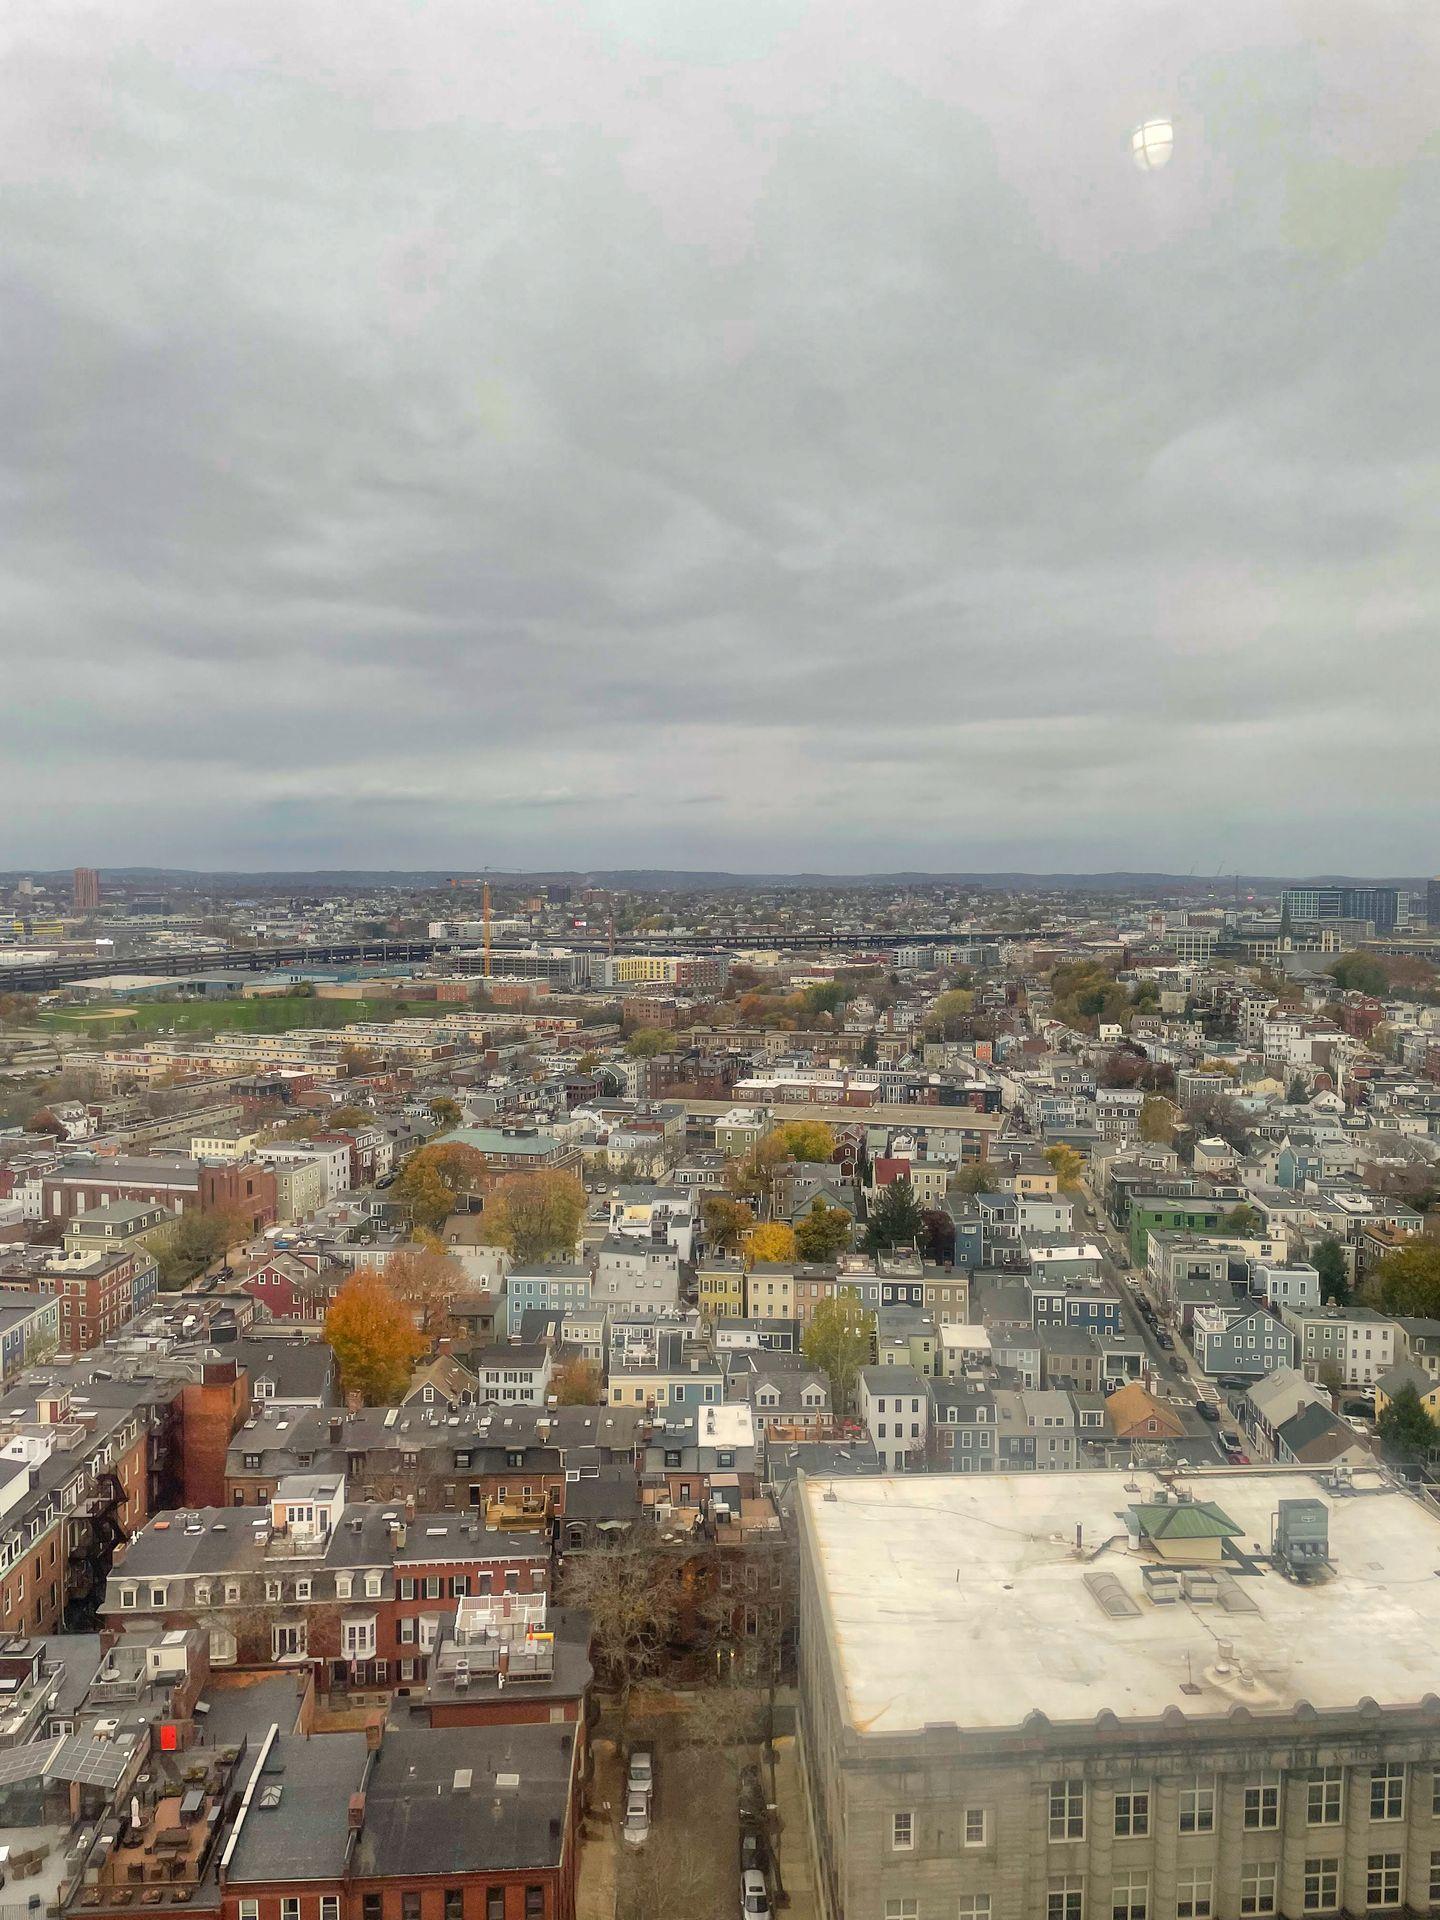 An expansive view of homes from the top of Bunker Hill Monument.